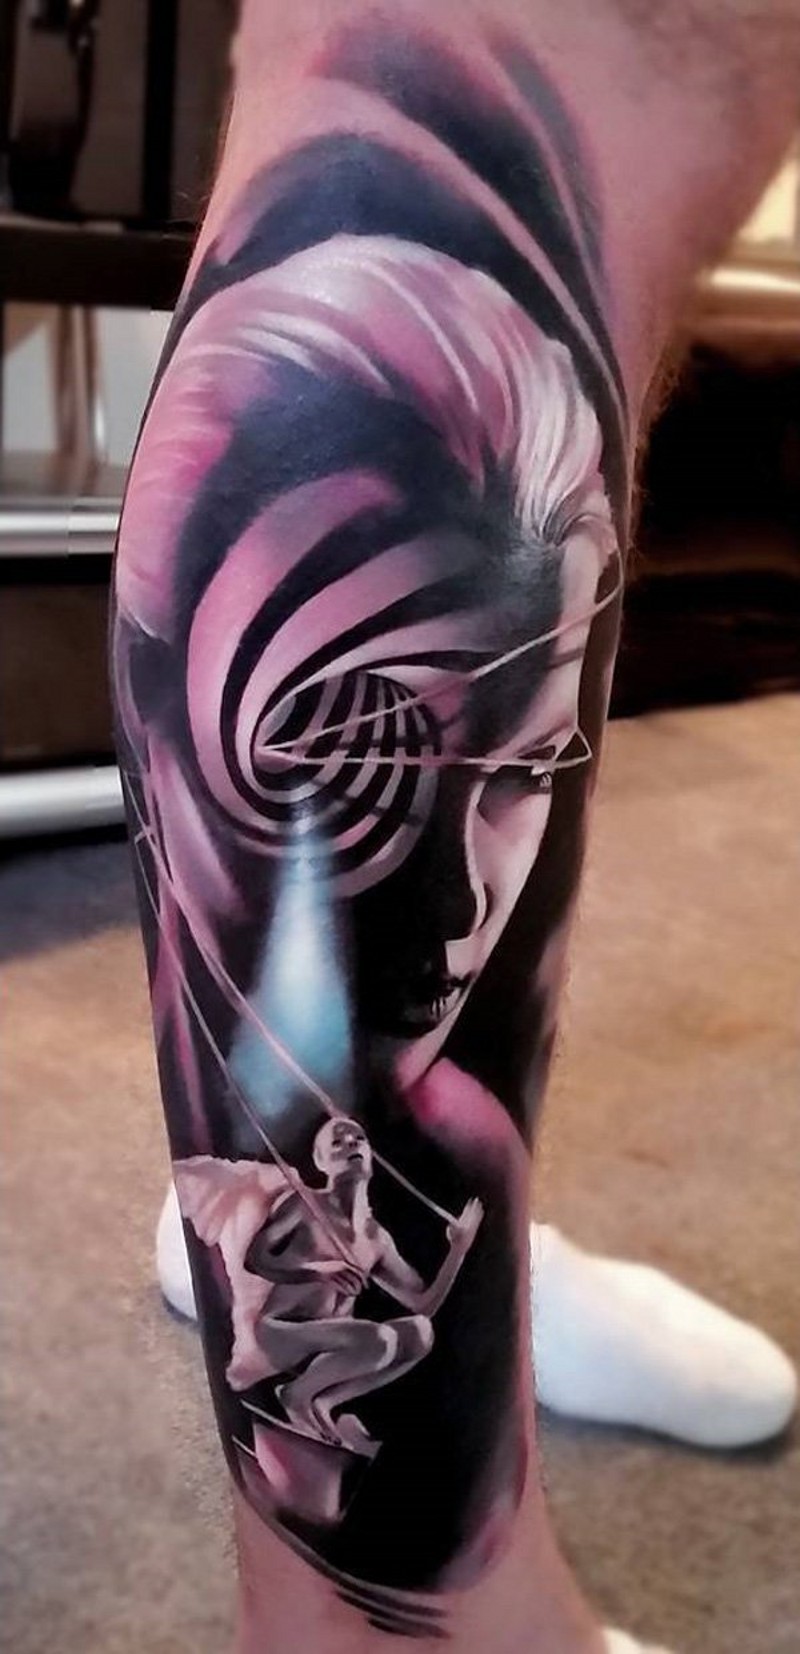 Stunning painted woman with hypnotic ornament tattoo on leg